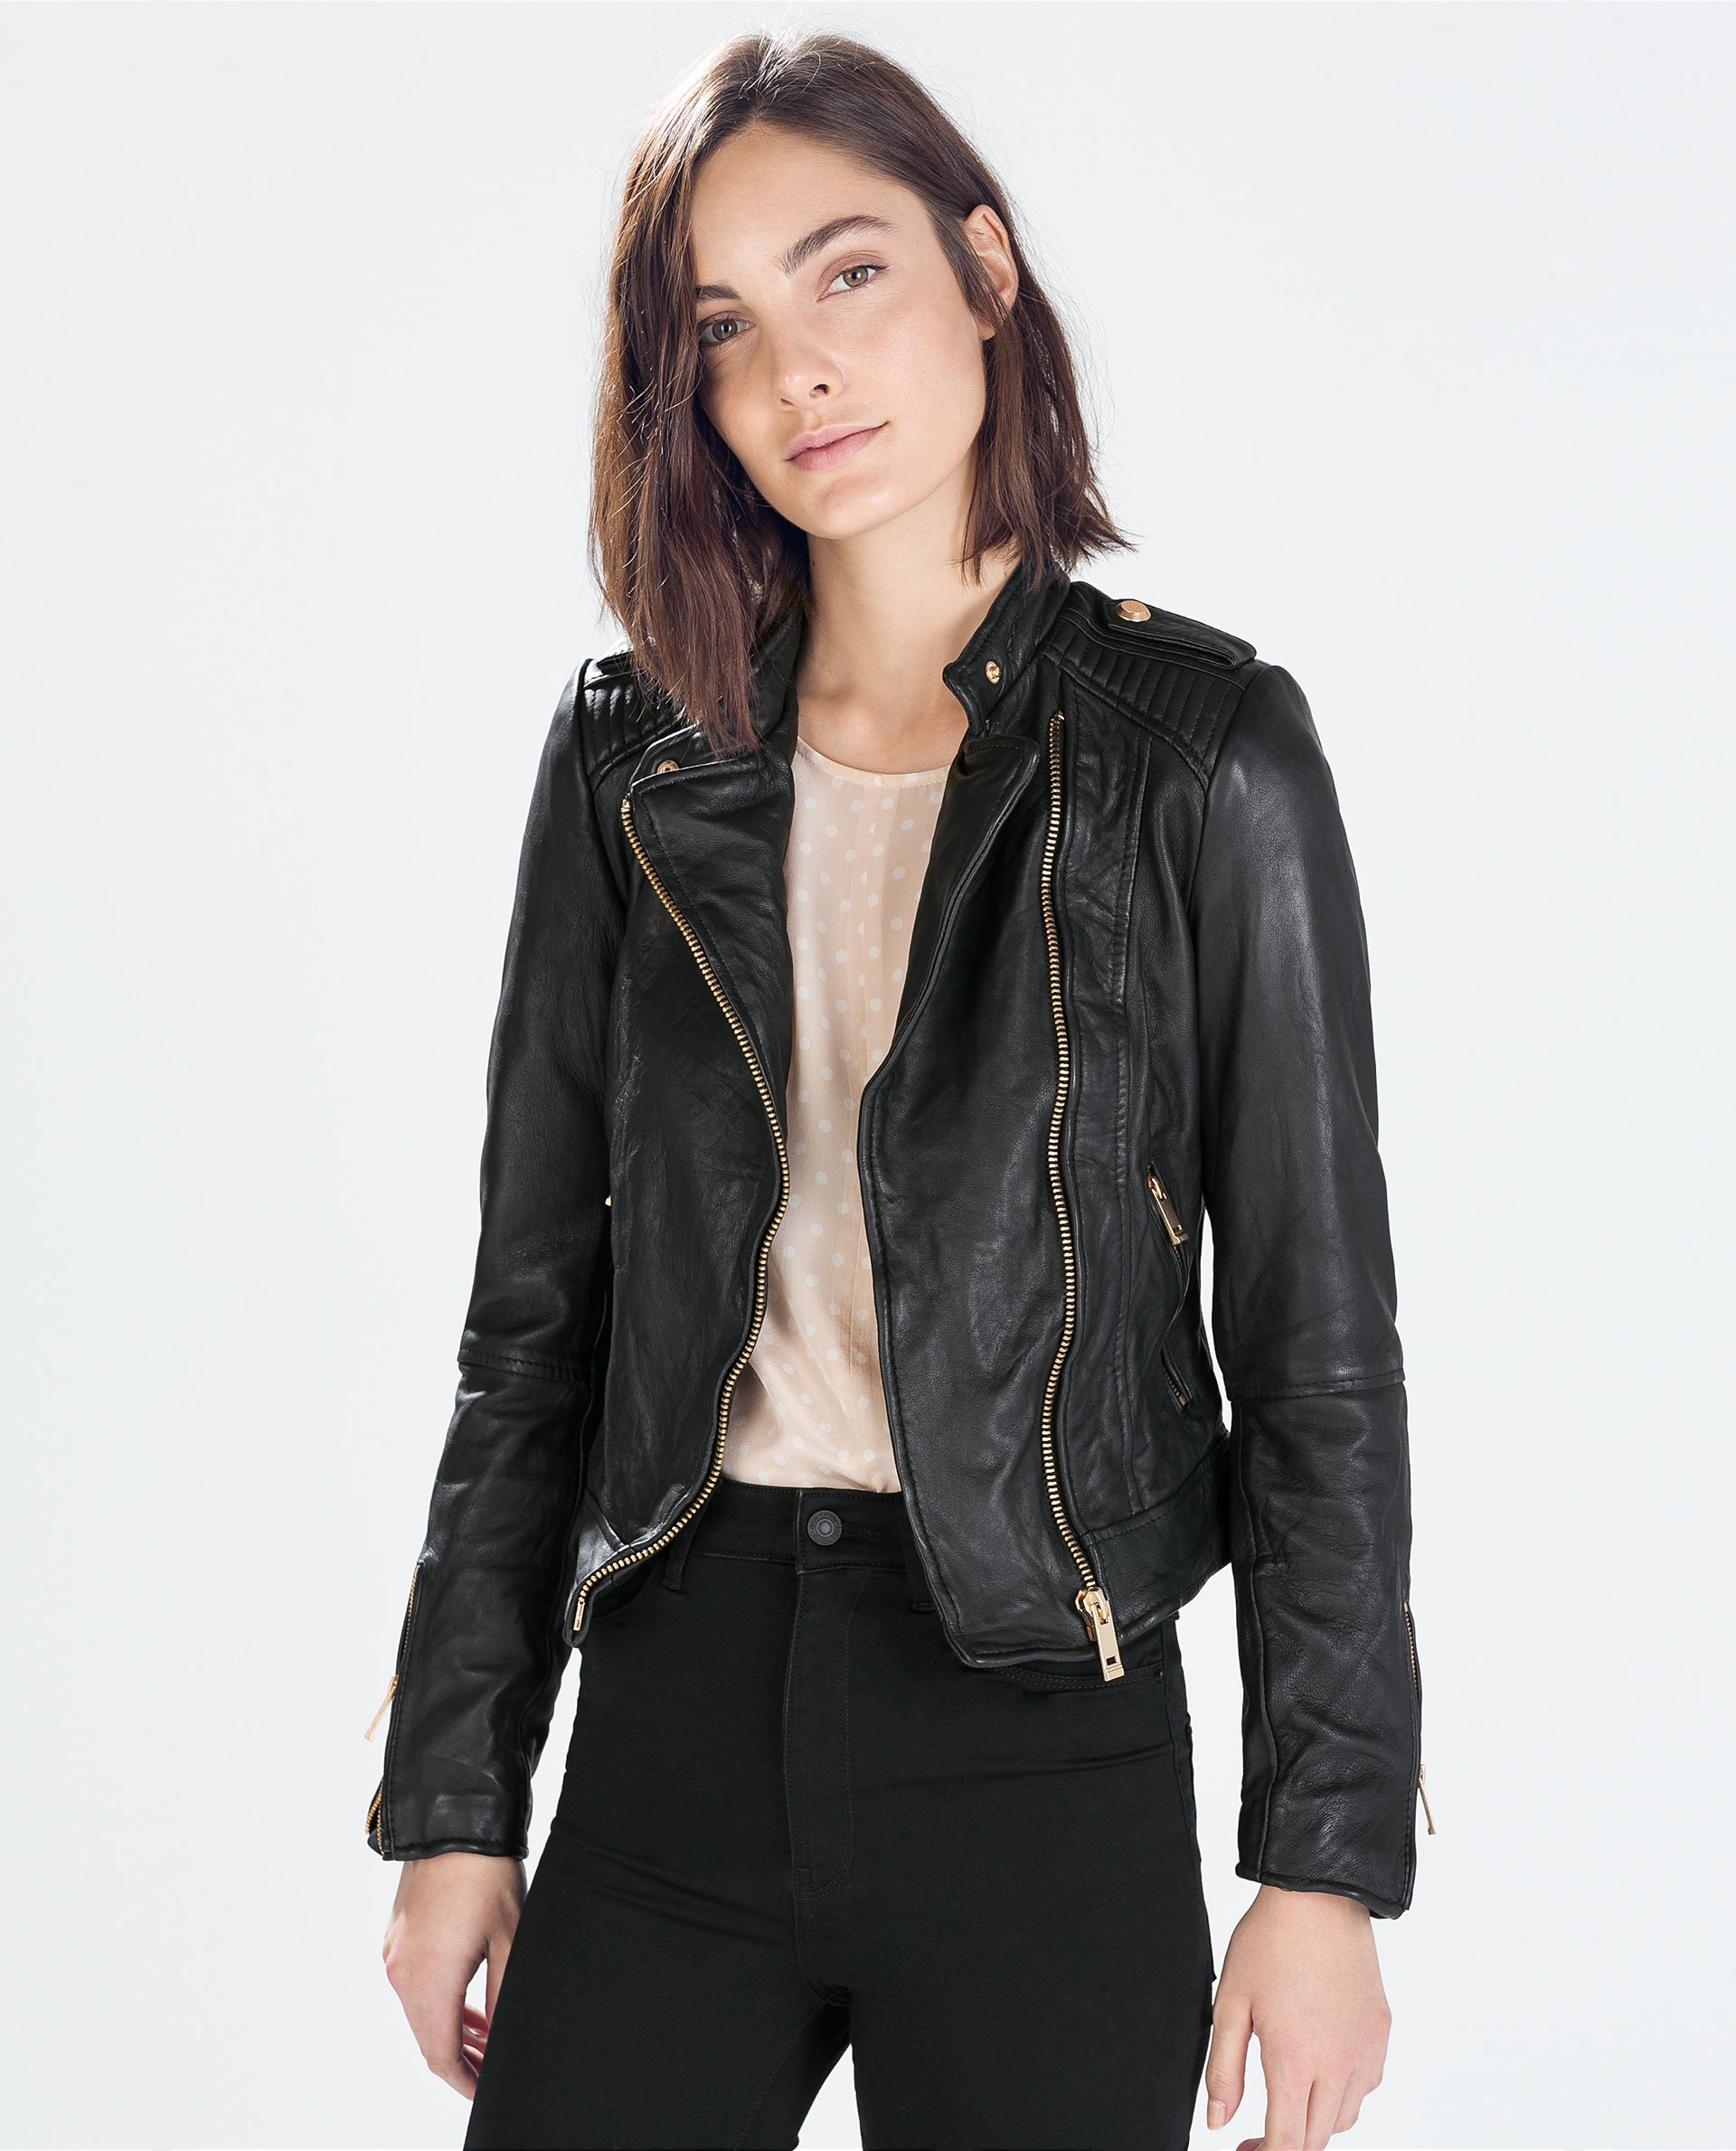 The Timeless Elegance of Zara Leather Jackets: Unveiling the Epitome of Style and Versatility